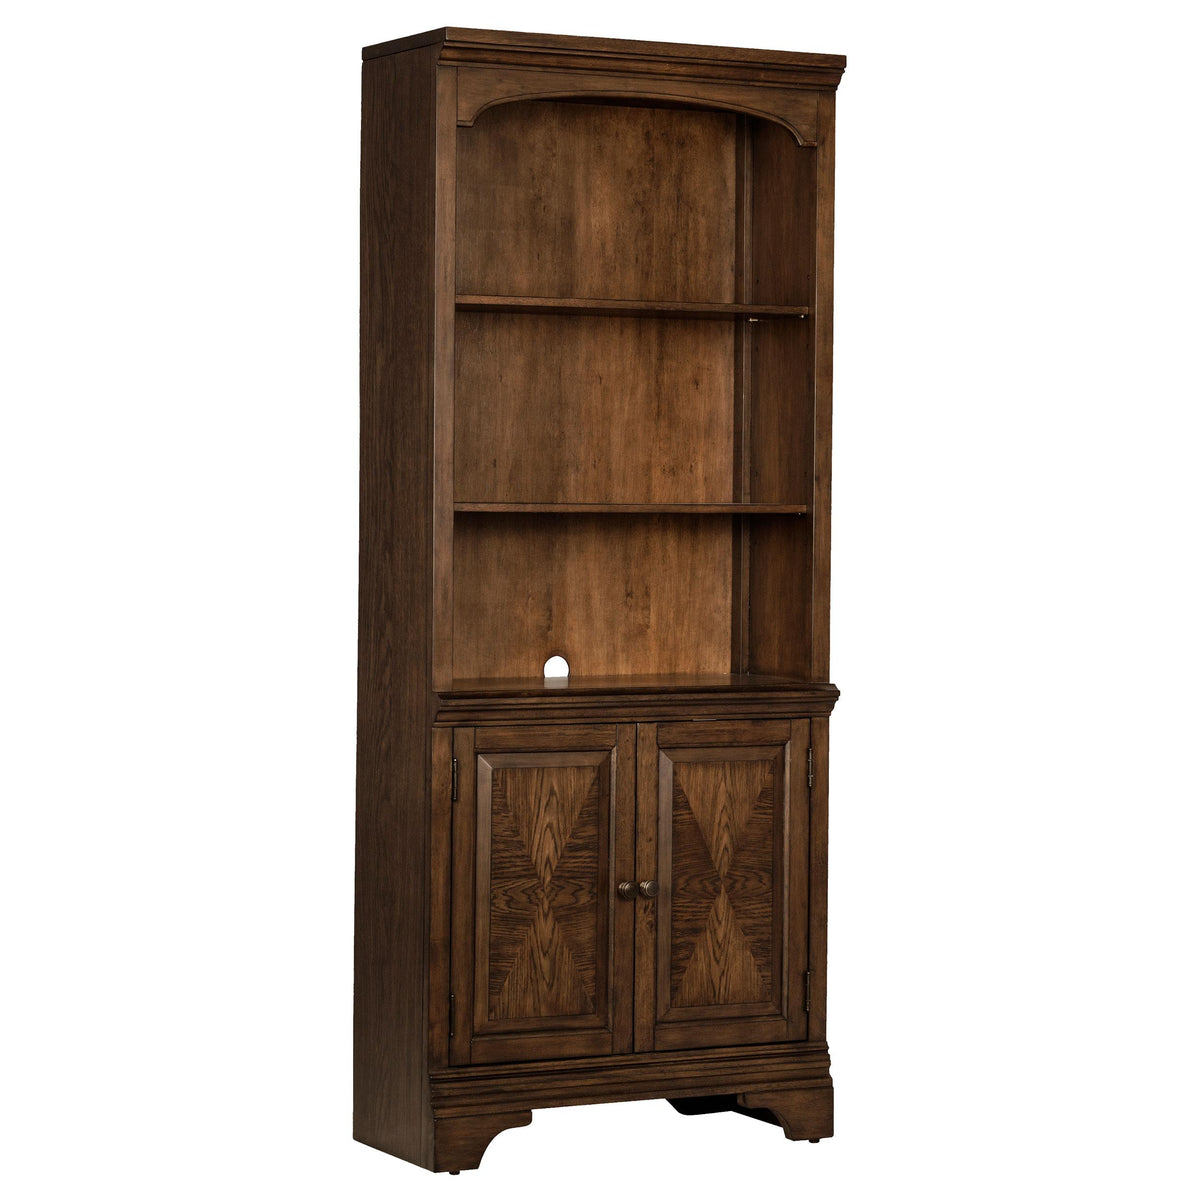 Hartshill Bookcase with Cabinet Burnished Oak Hartshill Bookcase with Cabinet Burnished Oak Half Price Furniture